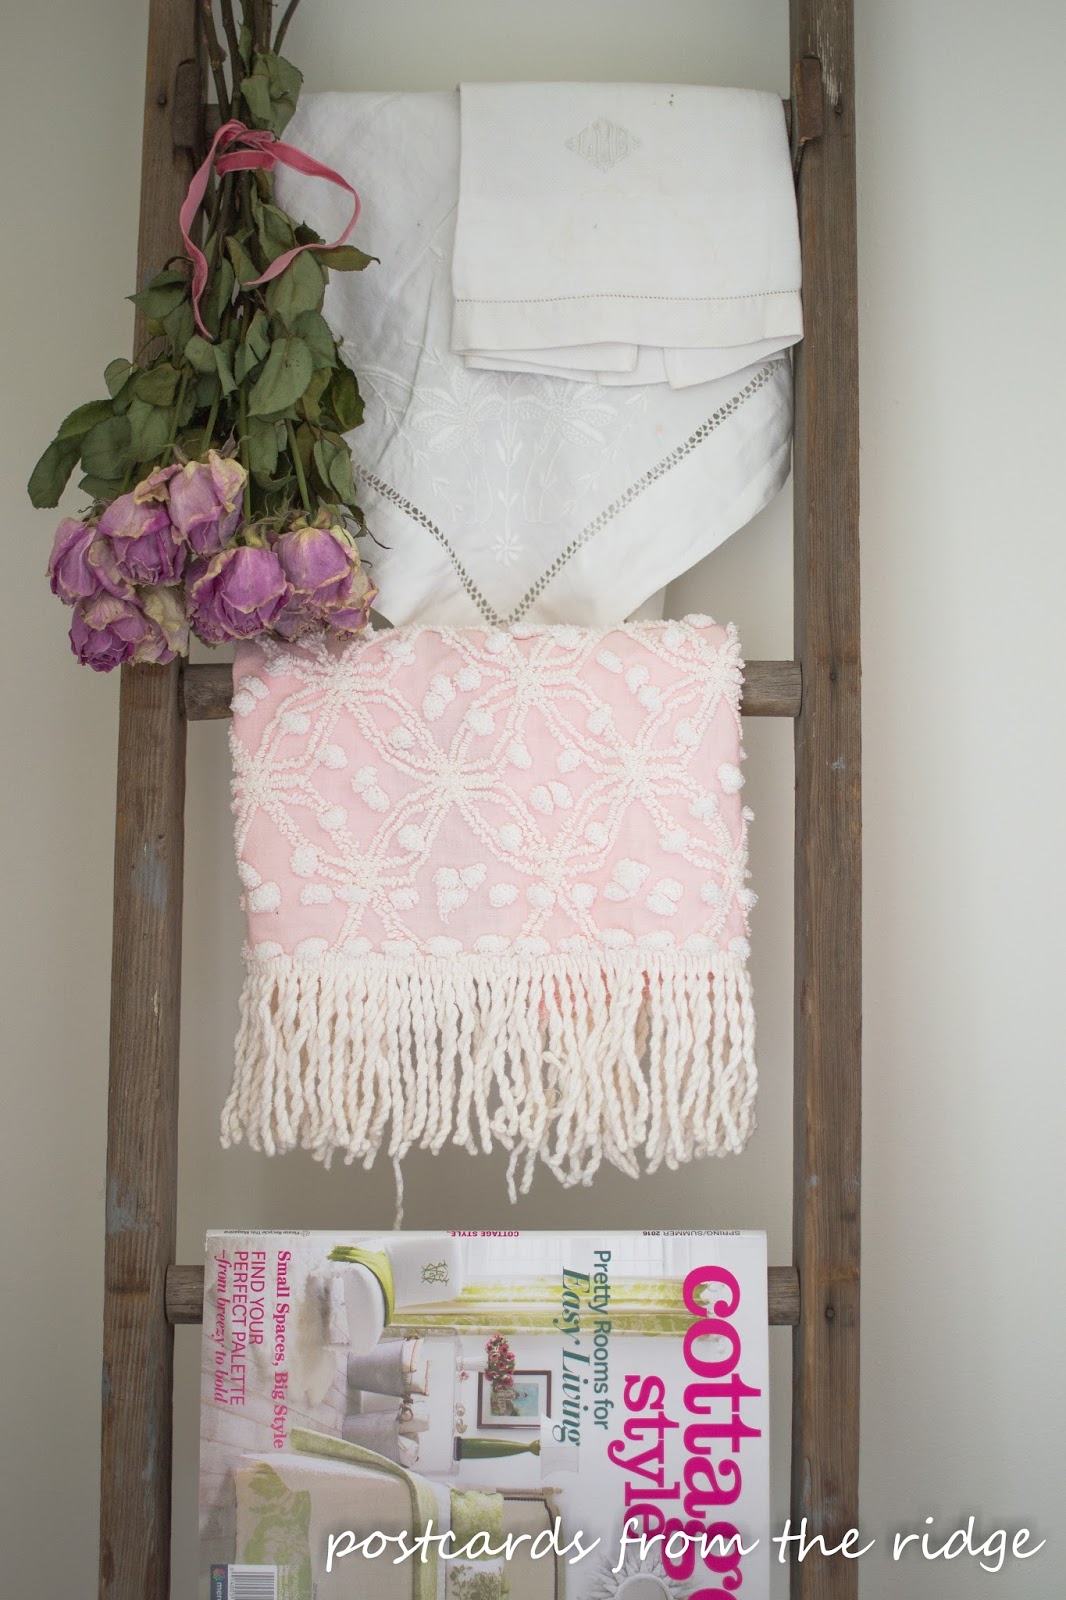 Dried roses and vintage linens on an old ladder.jpg